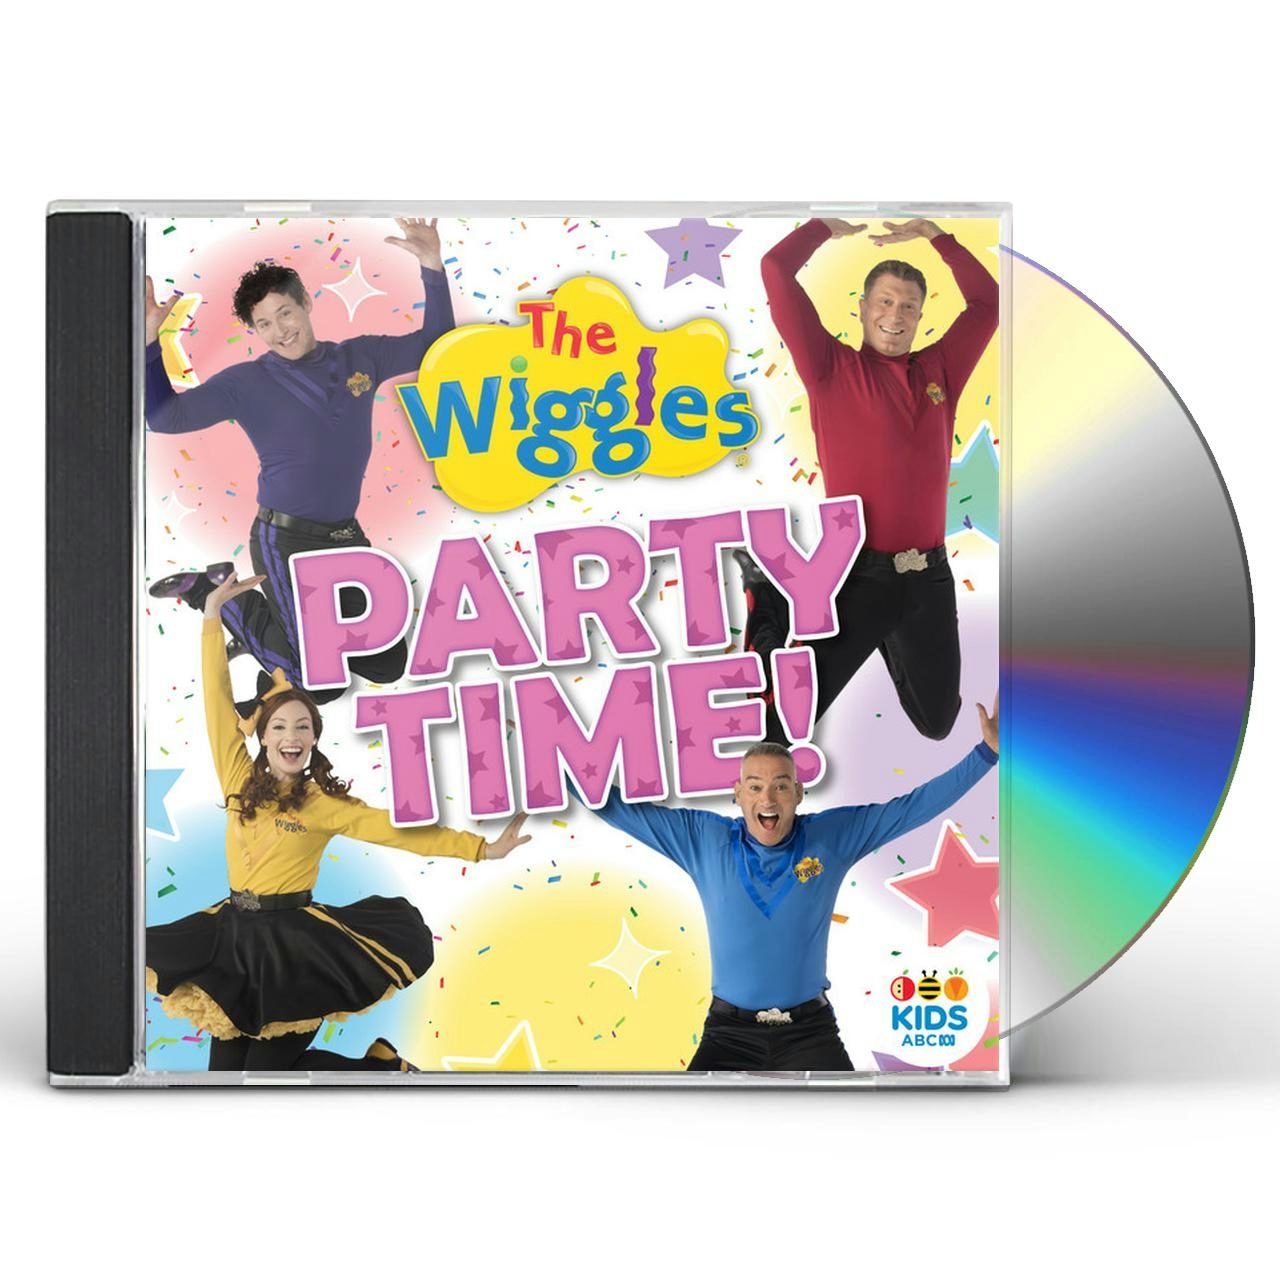 The Wiggles Party Time Cd